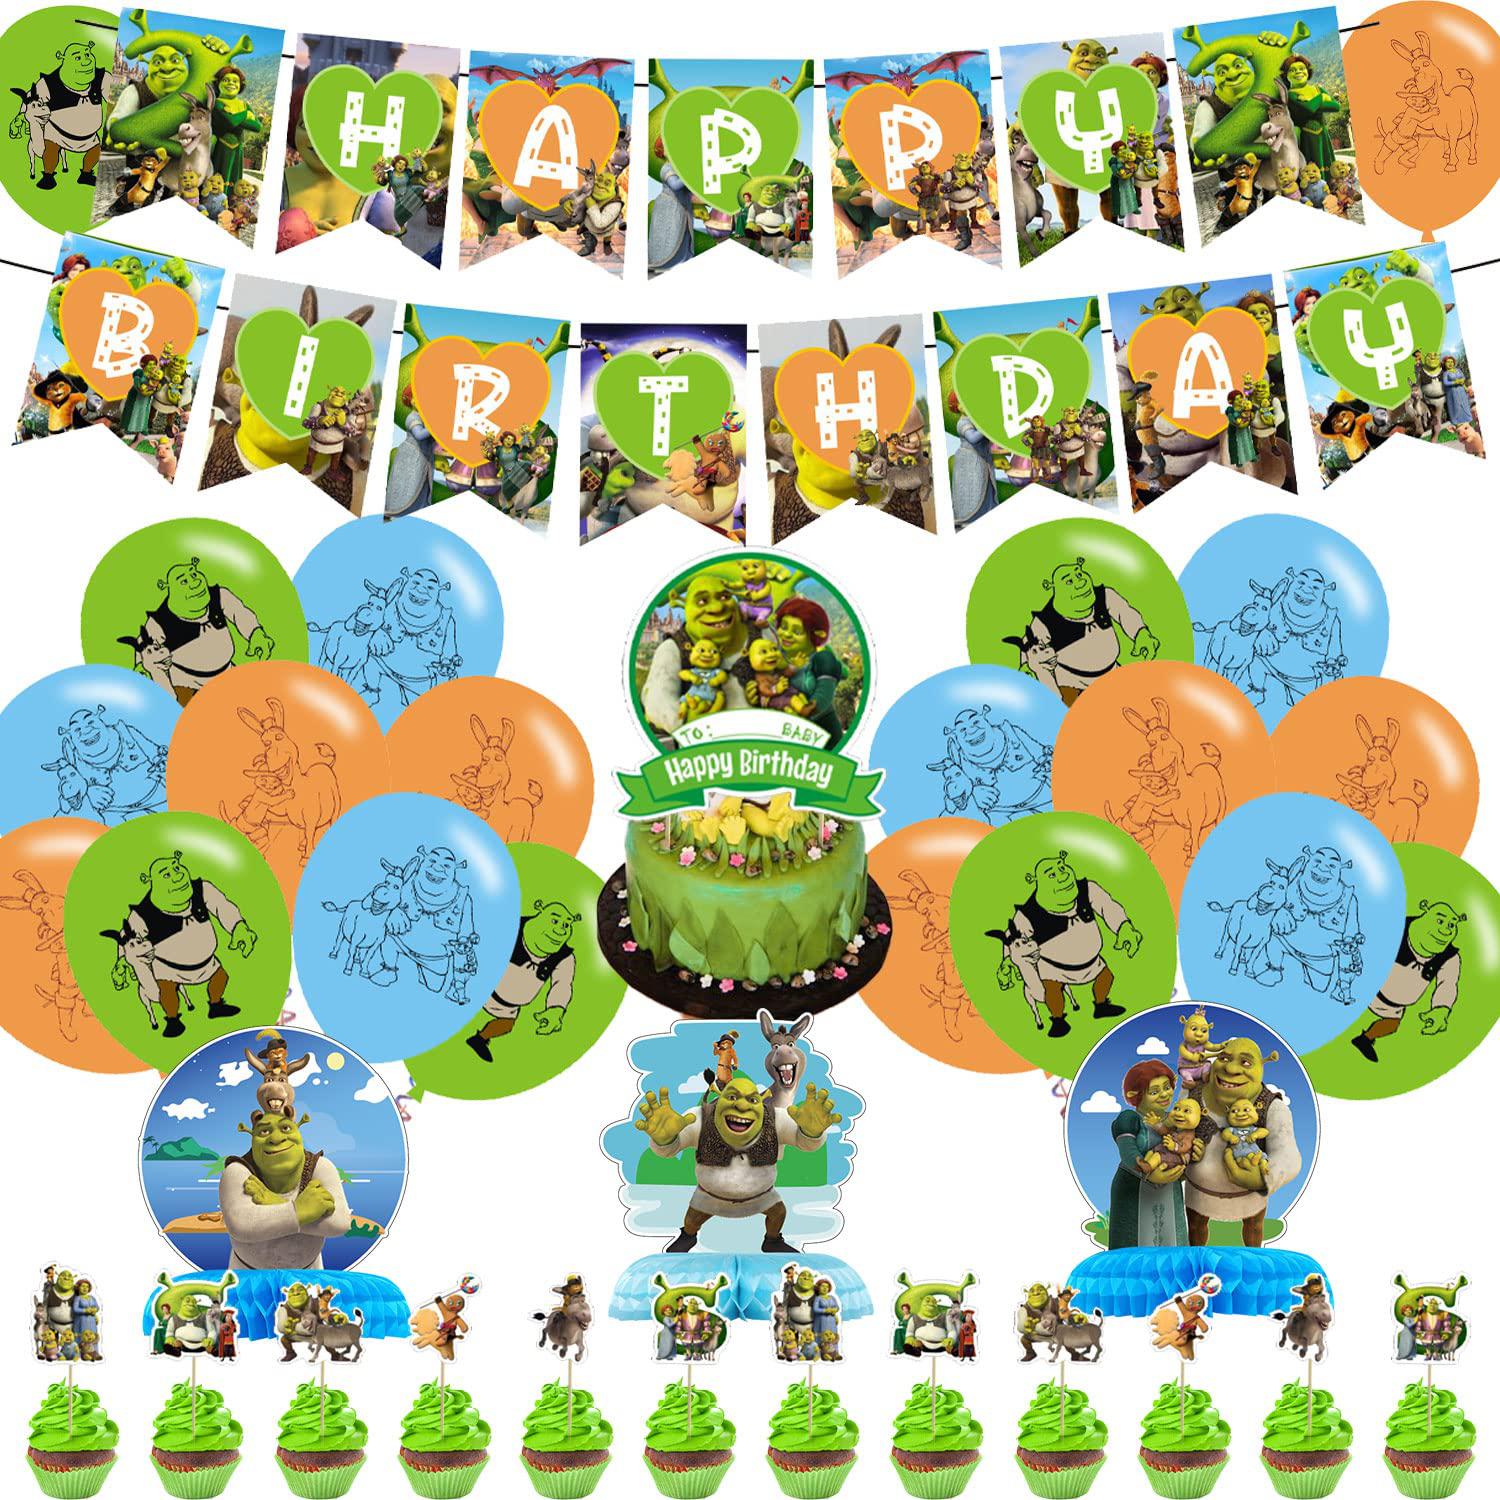 AUSDU shrek theme party decorations,shrek birthday party supplies includes banner - cake topper - 12 cupcake toppers - 18 balloons-